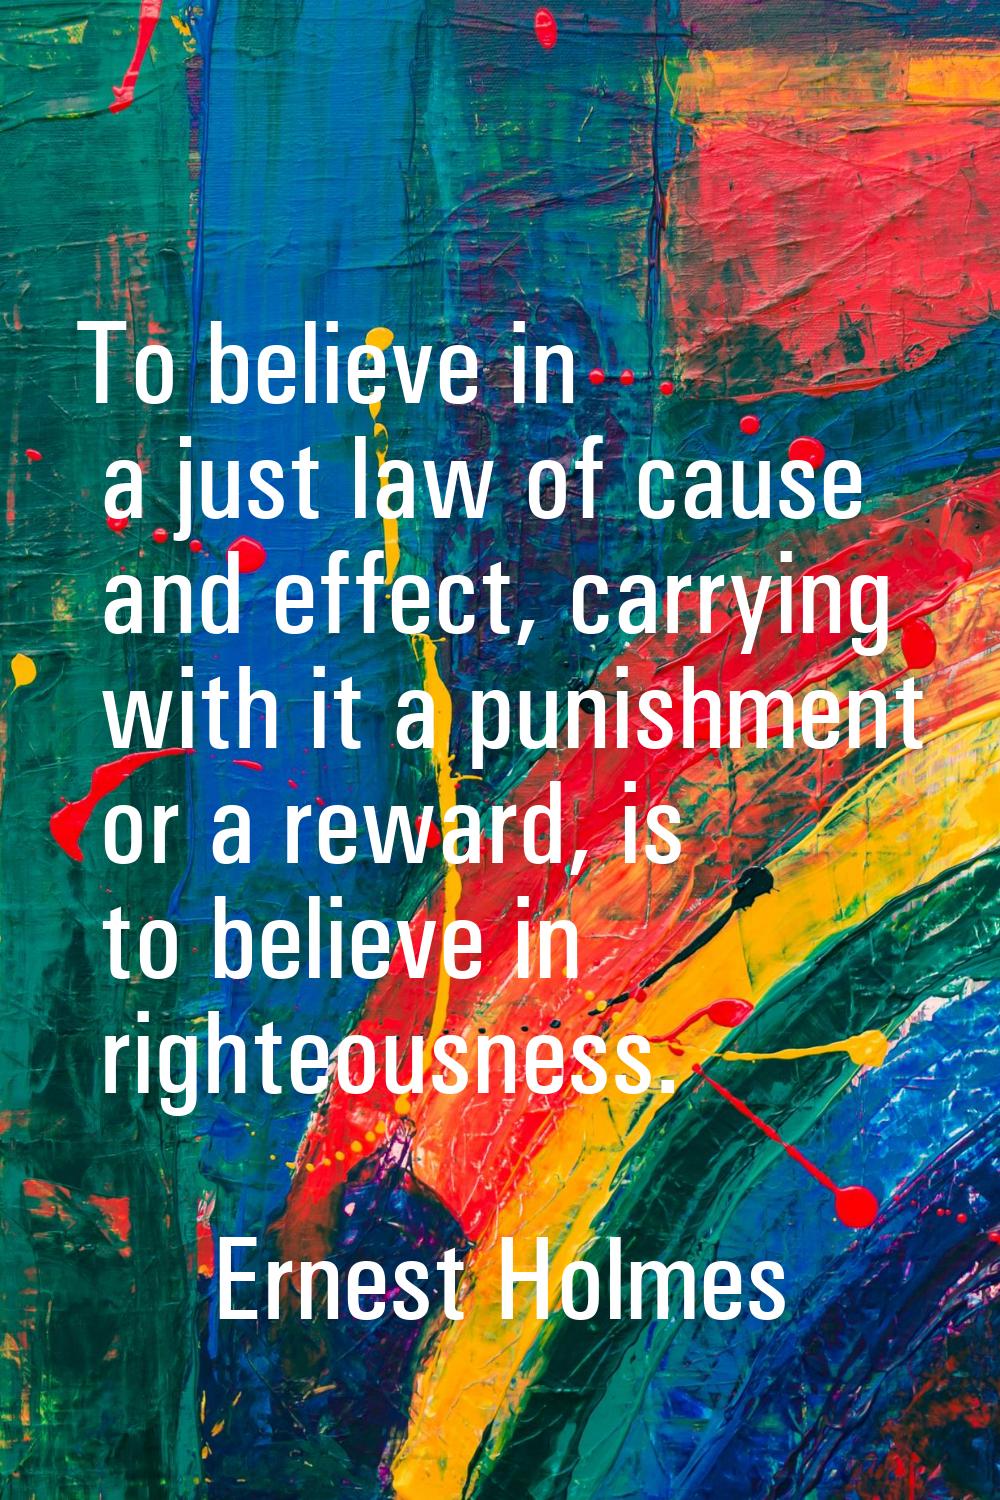 To believe in a just law of cause and effect, carrying with it a punishment or a reward, is to beli